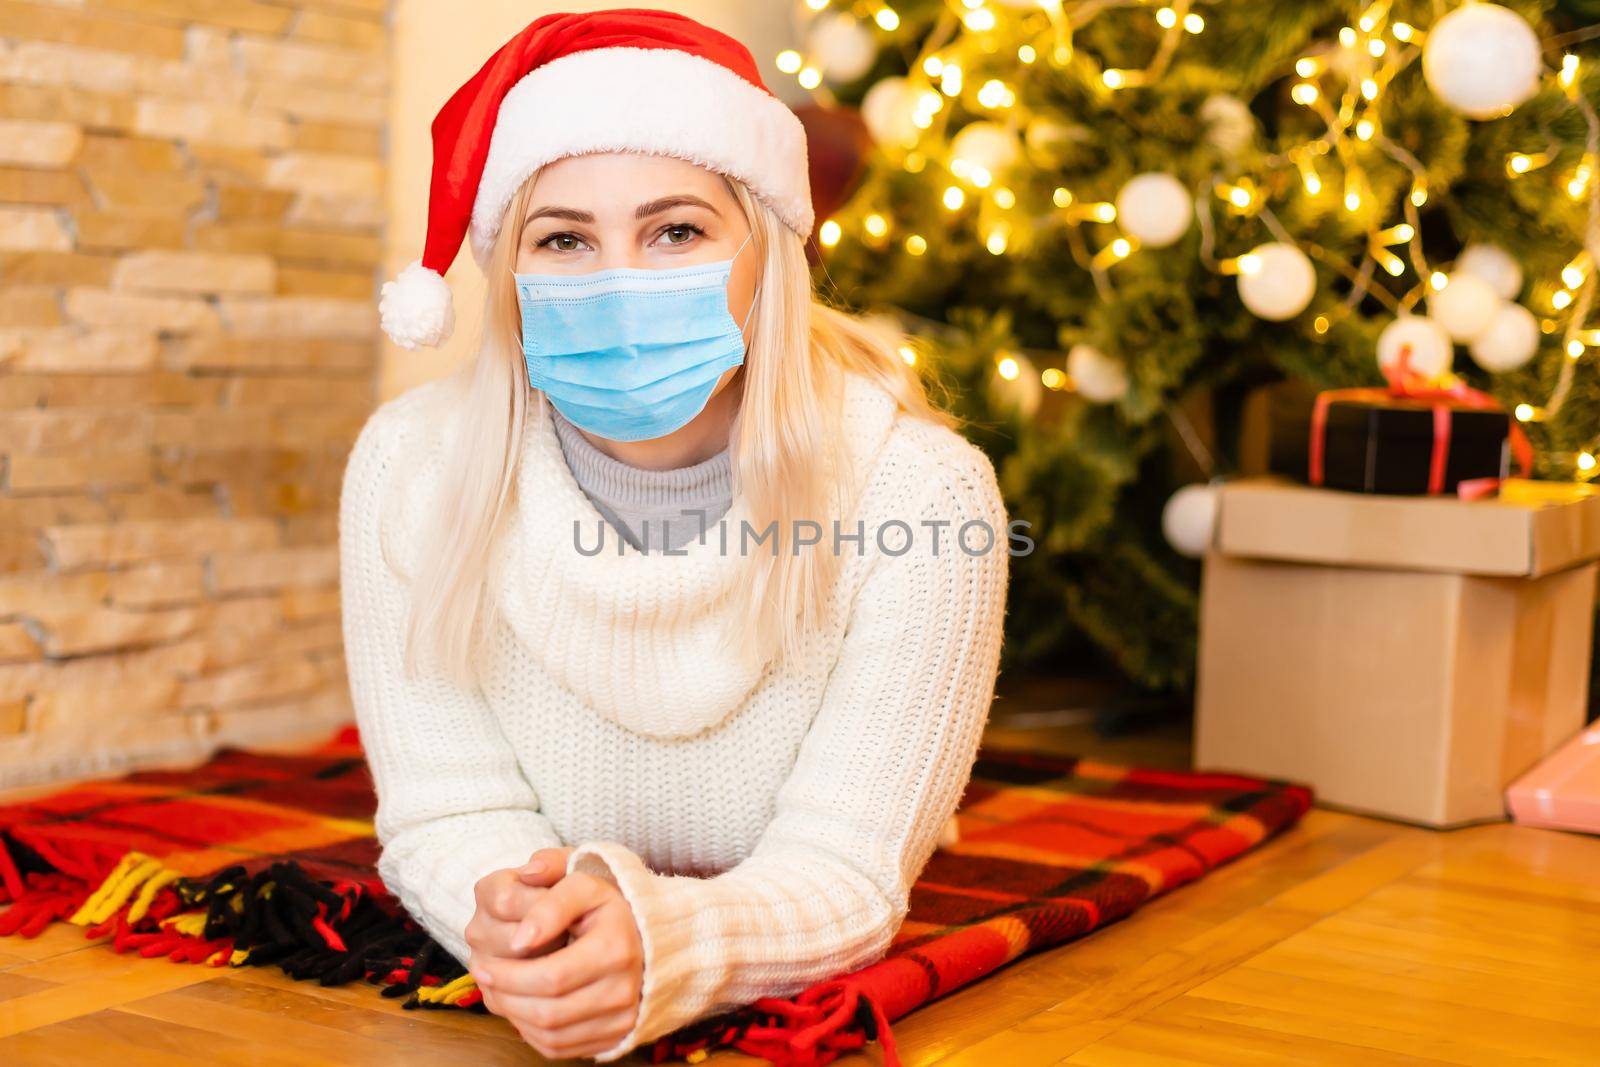 Christmas with coronawirus pandemic. Portrait of a young woman wearing protective face mask and looking sad for Covid-19 with Christmas tree on the background, coronavirus and Christmas concept by Andelov13